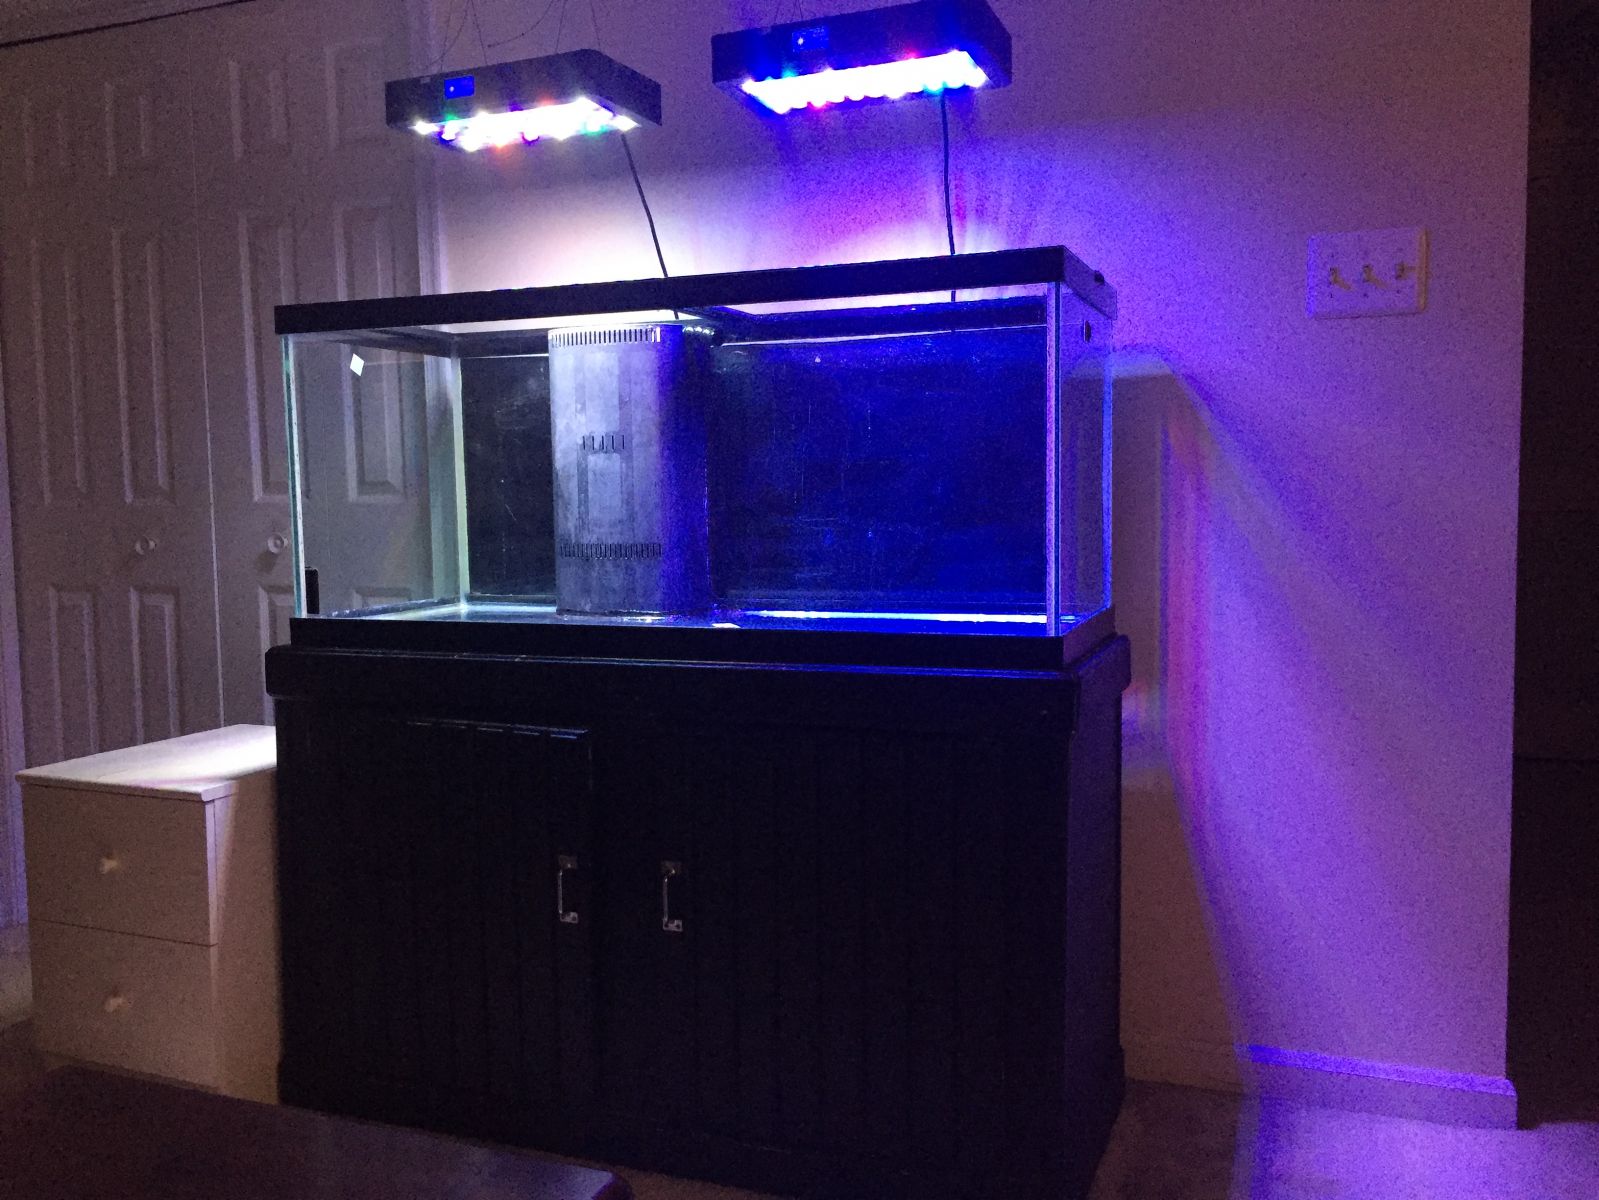 75g RR Tank and Stand - $147 OBO